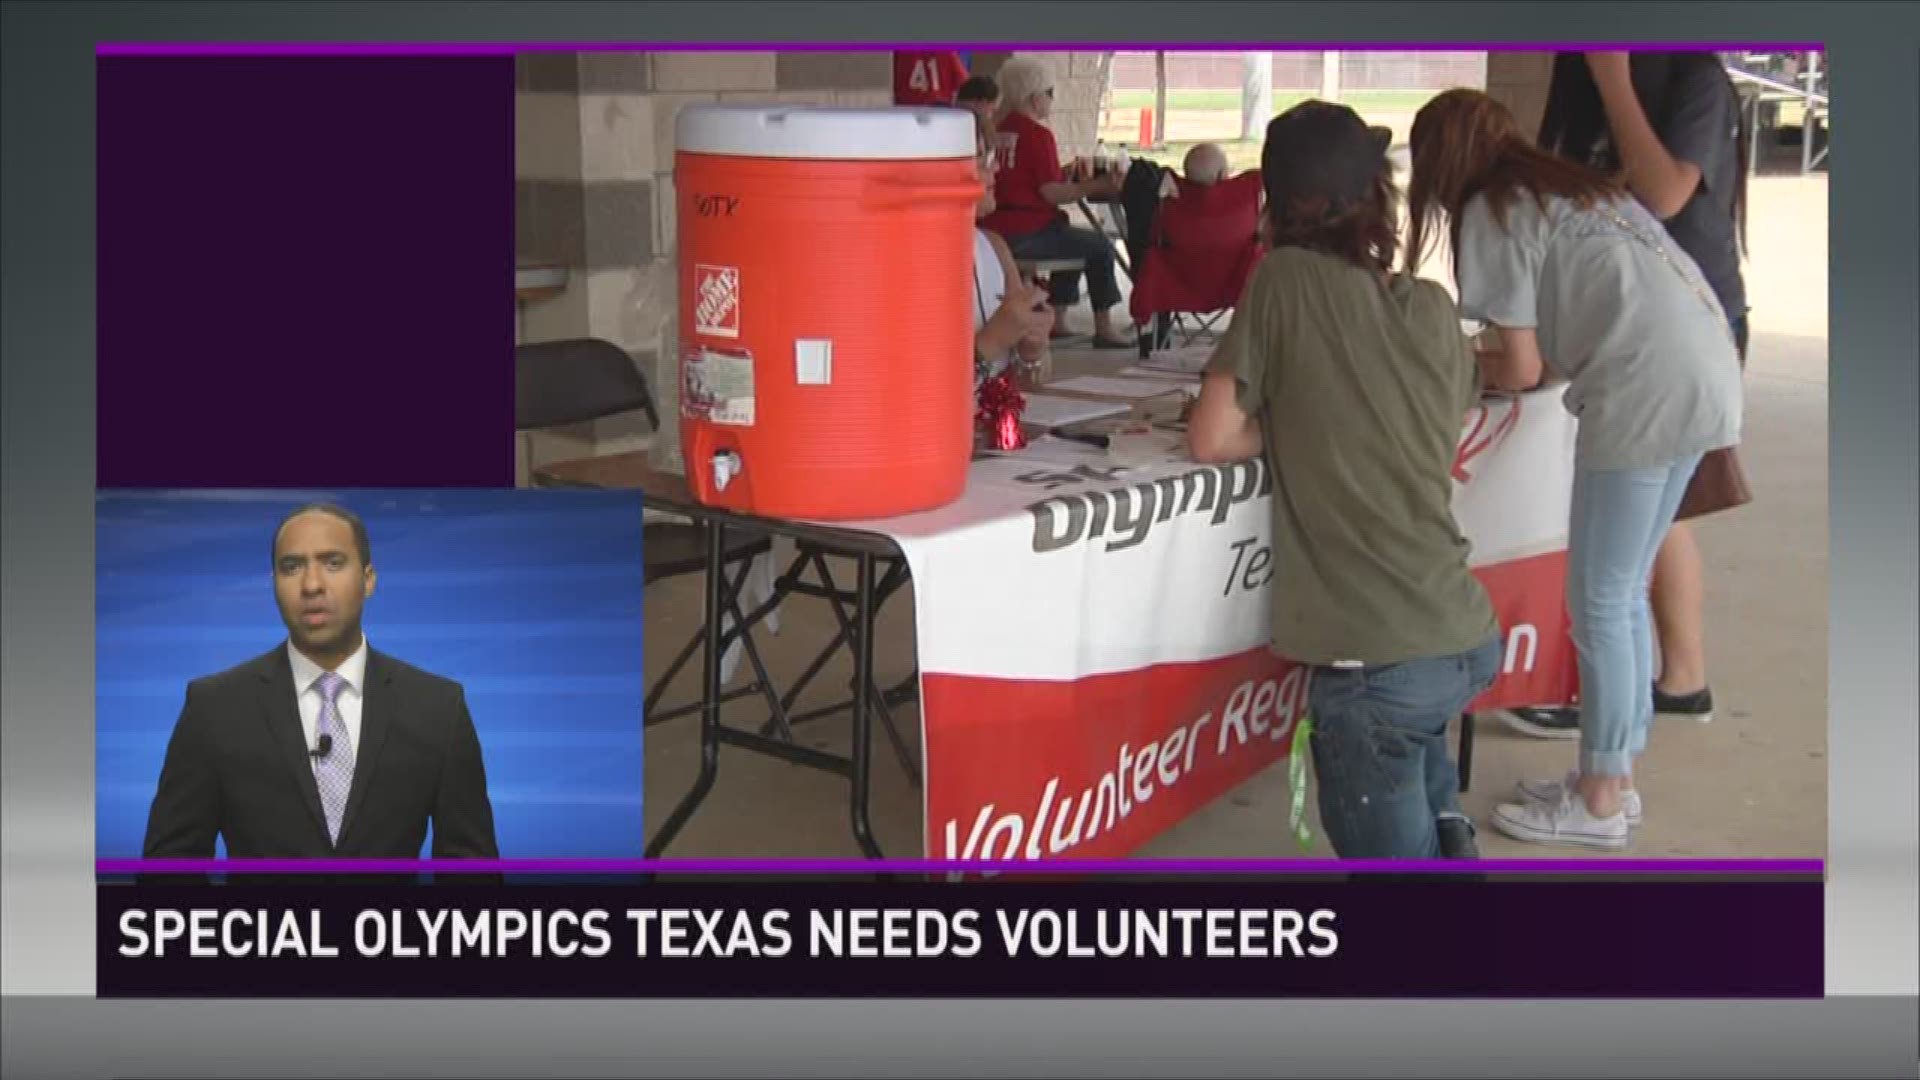 About 500 volunteers are needed for next weekend's games. 